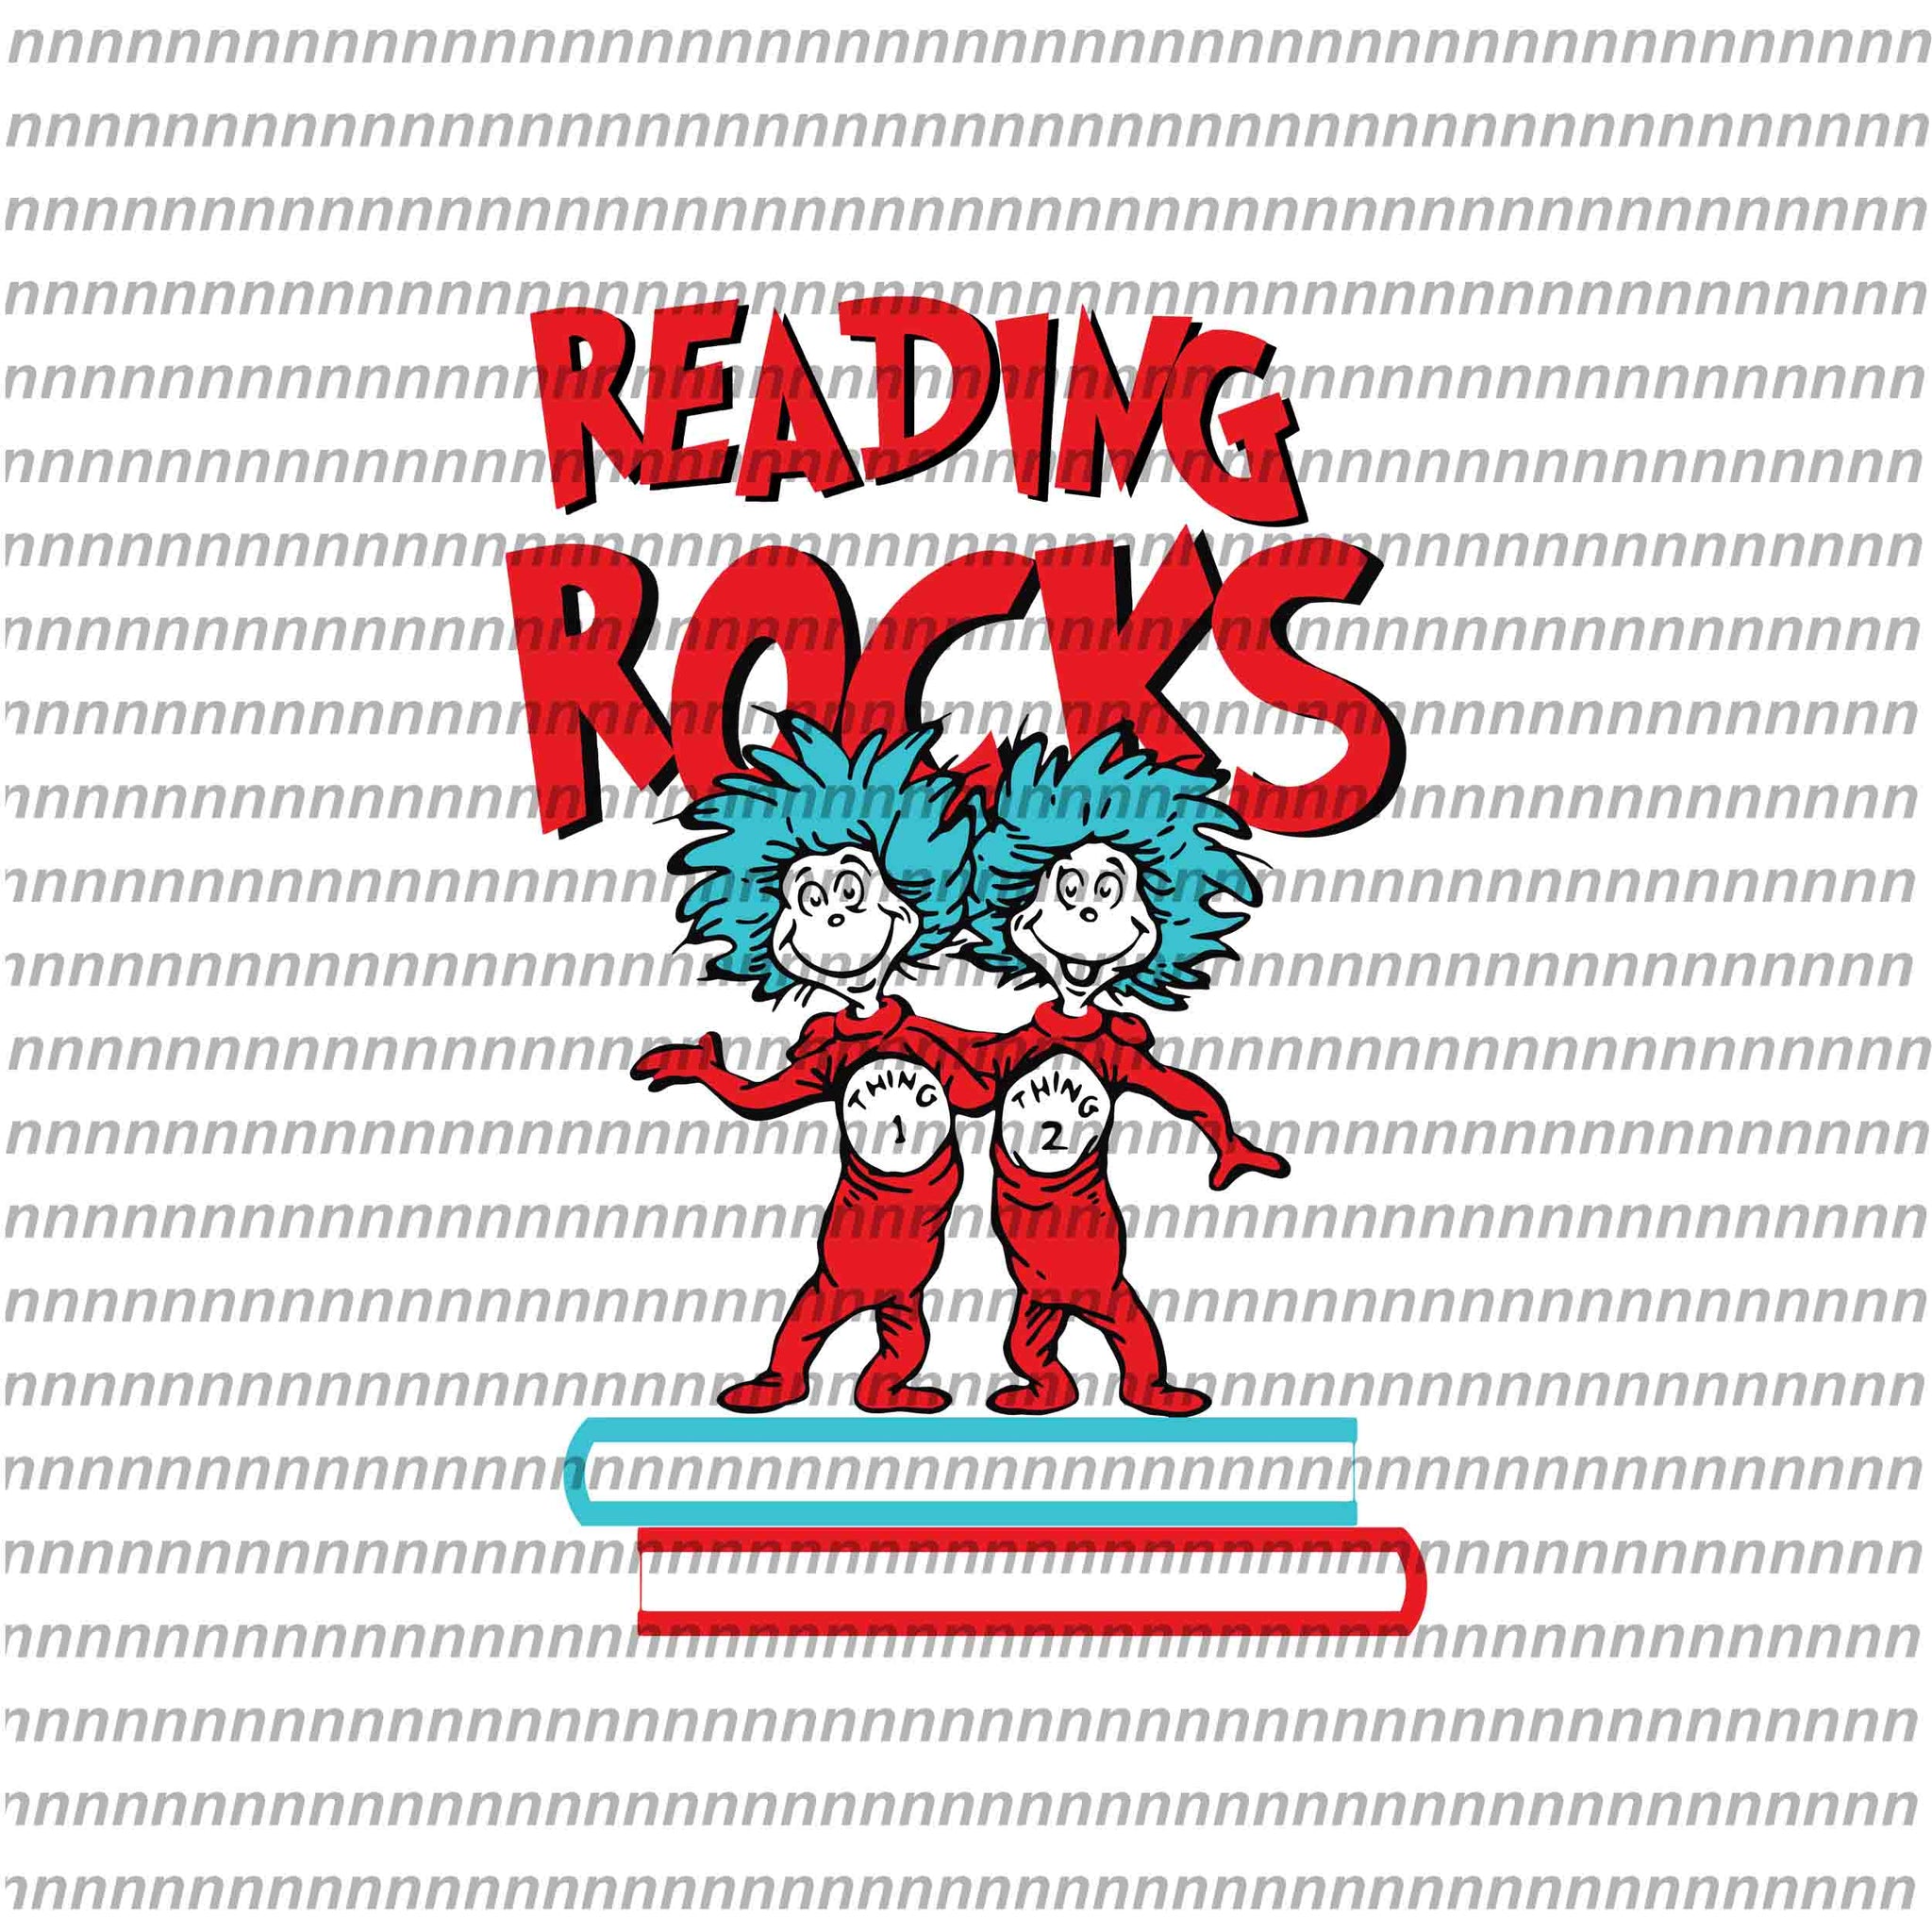 Reading rocks book, dr seuss vector, dr seuss quote, dr seuss design, Cat in the hat svg, thing 1 thing 2 thing 3, svg, png, dxf, eps file